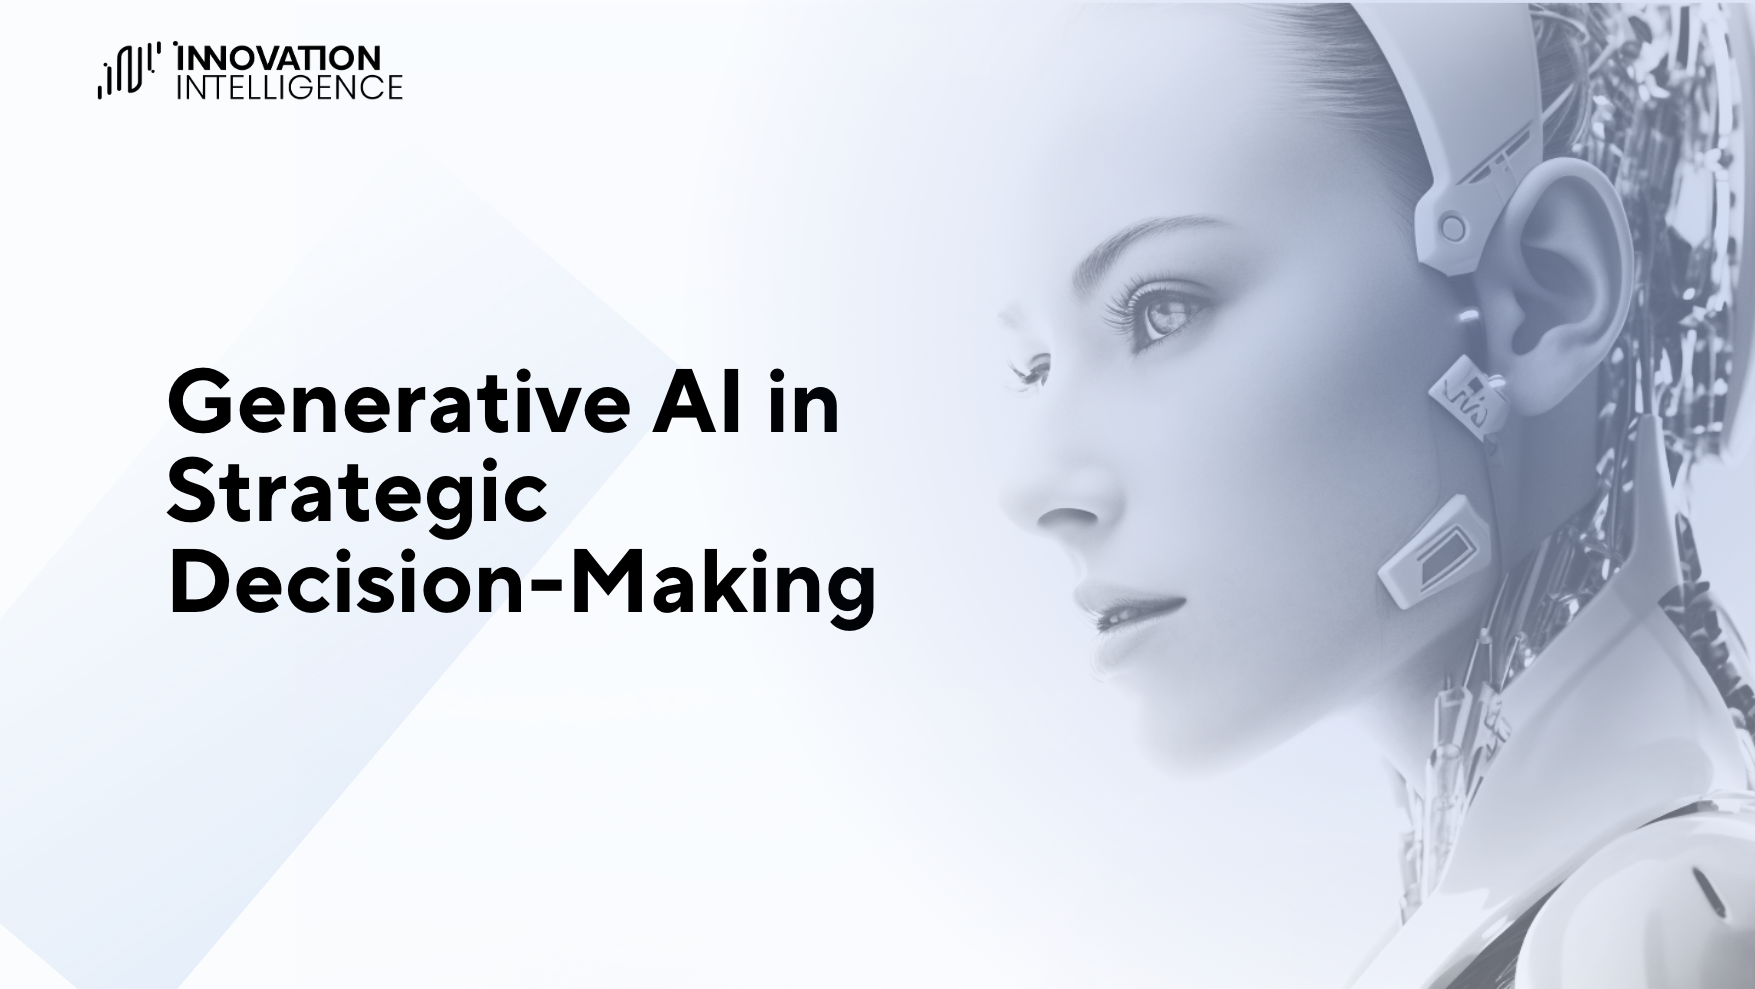 Generative Ai for Corporate Innovation Report Download Image - Innovation Intelligence Generative AI Copilot for Strategy and Innovation